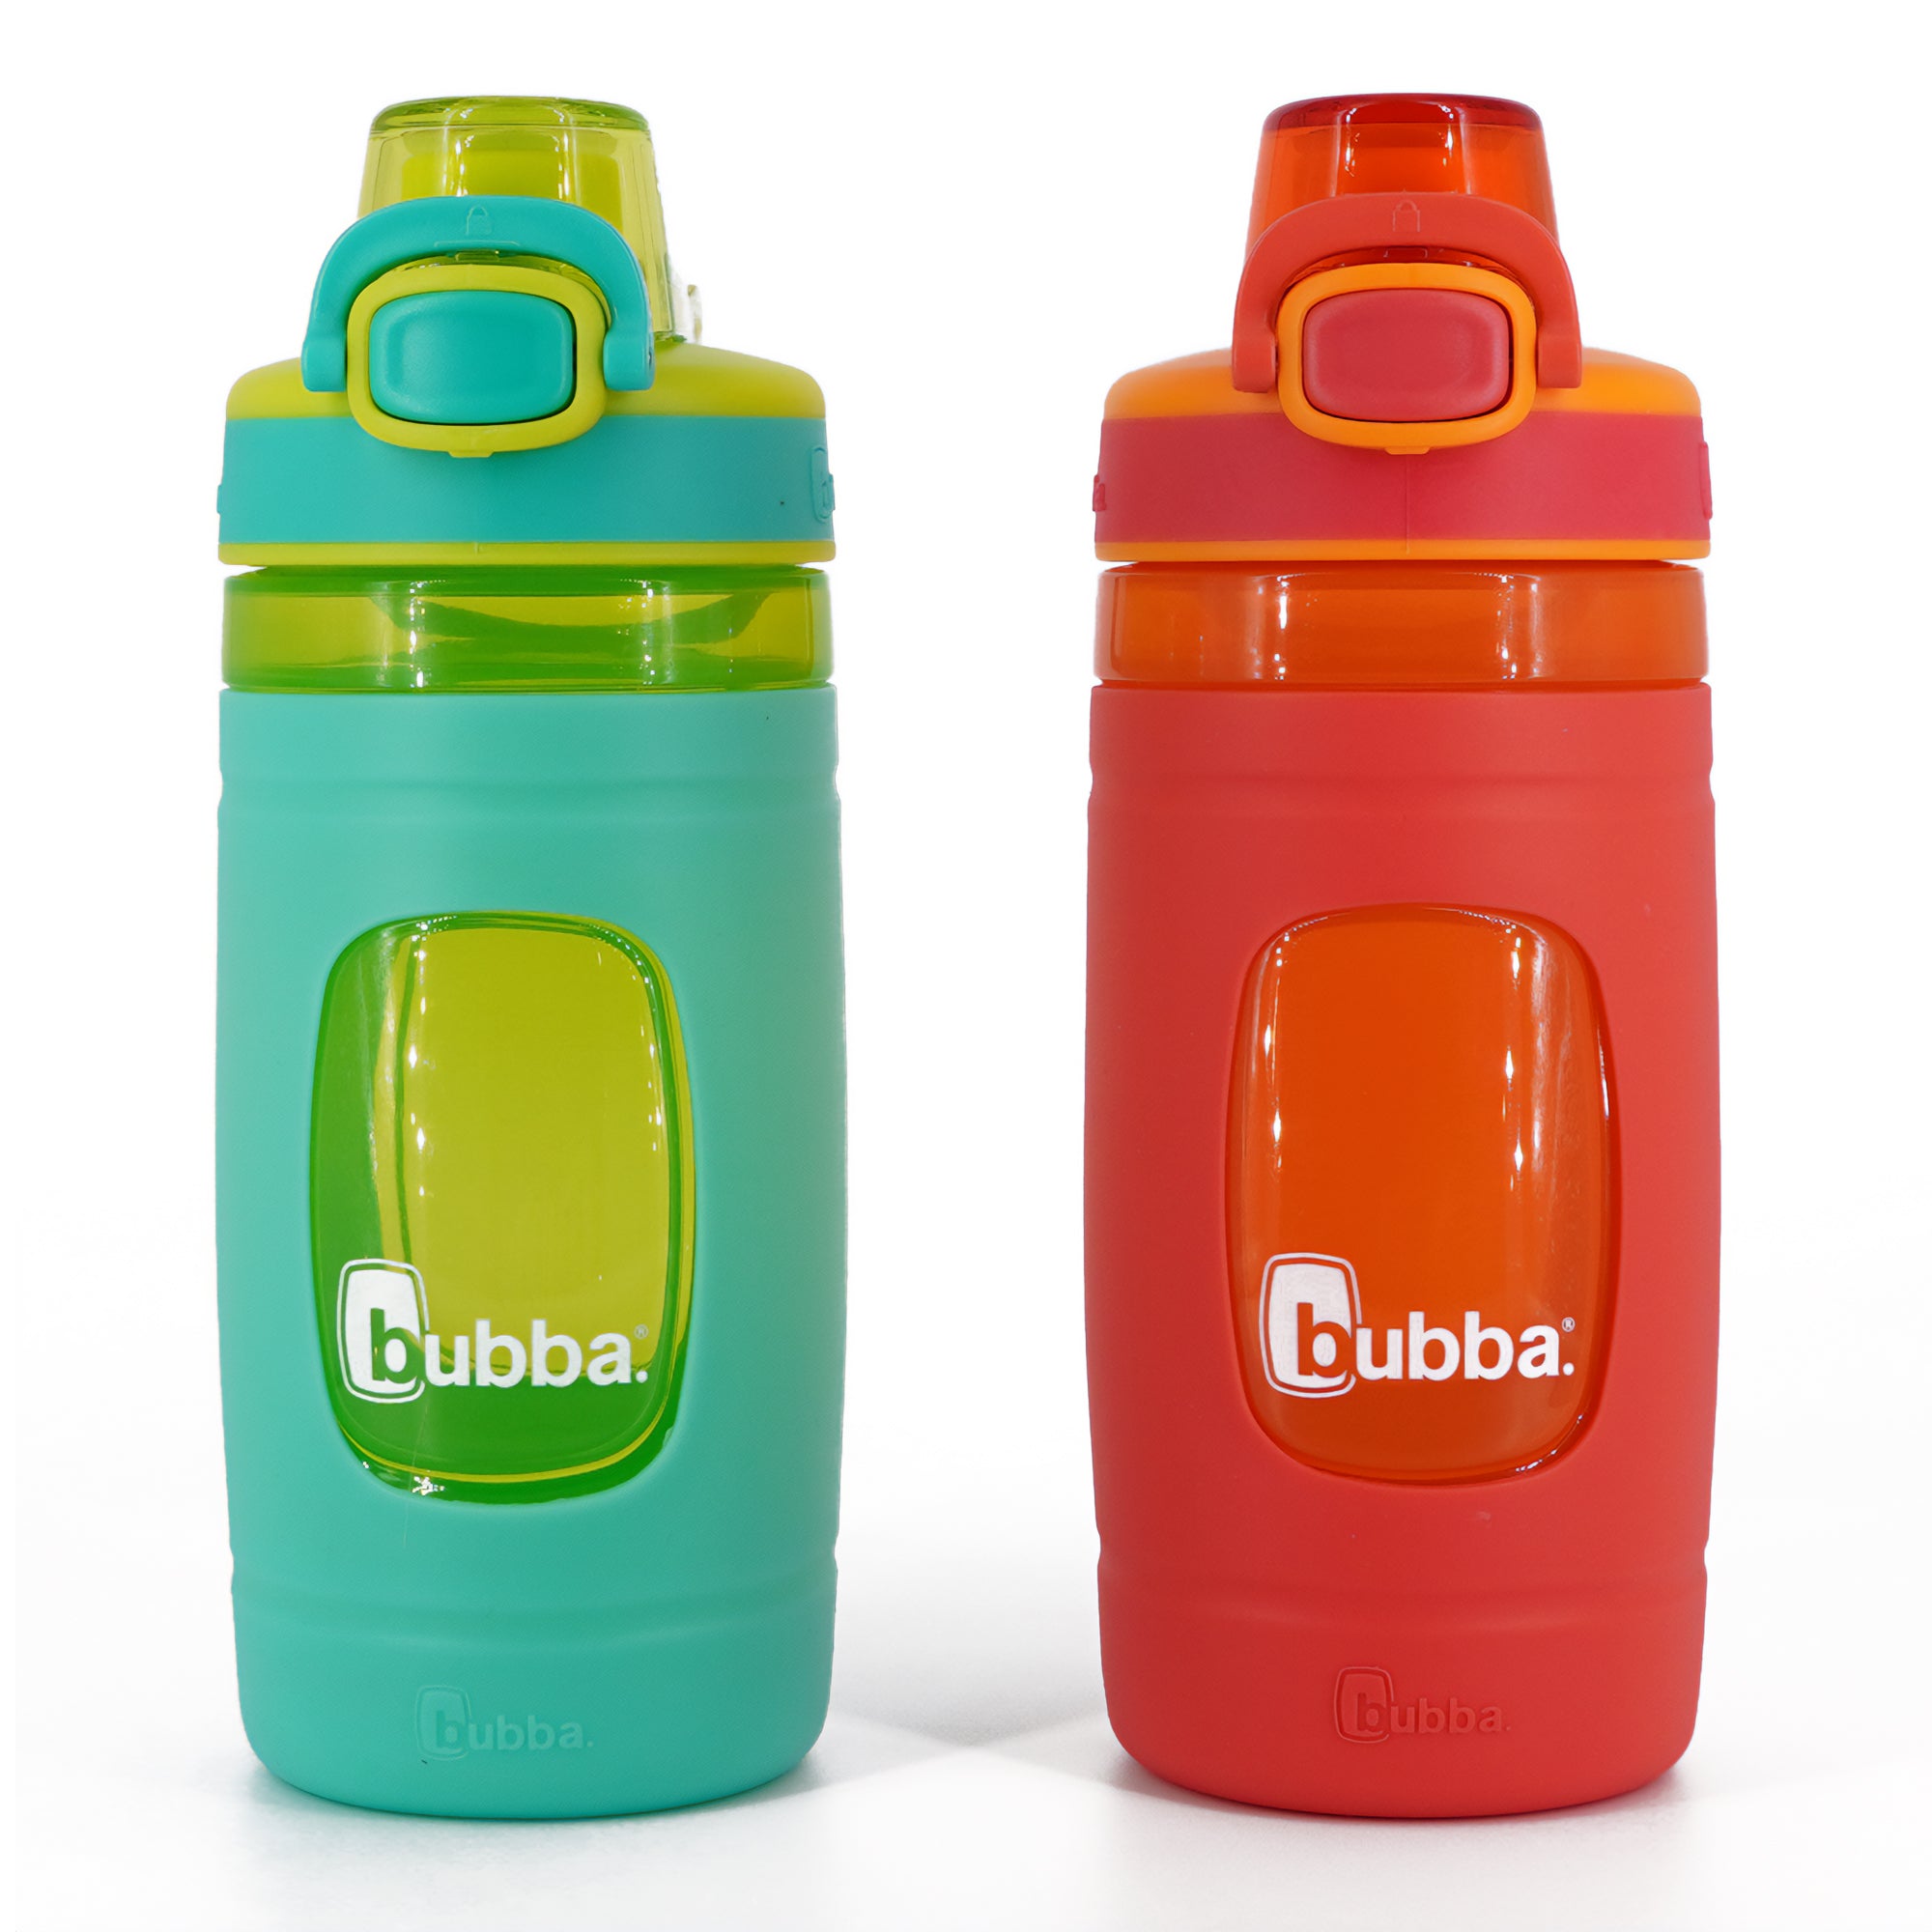 Bubba 16oz Plastic Flo Kids' Water Bottle With Silicone Sleeve